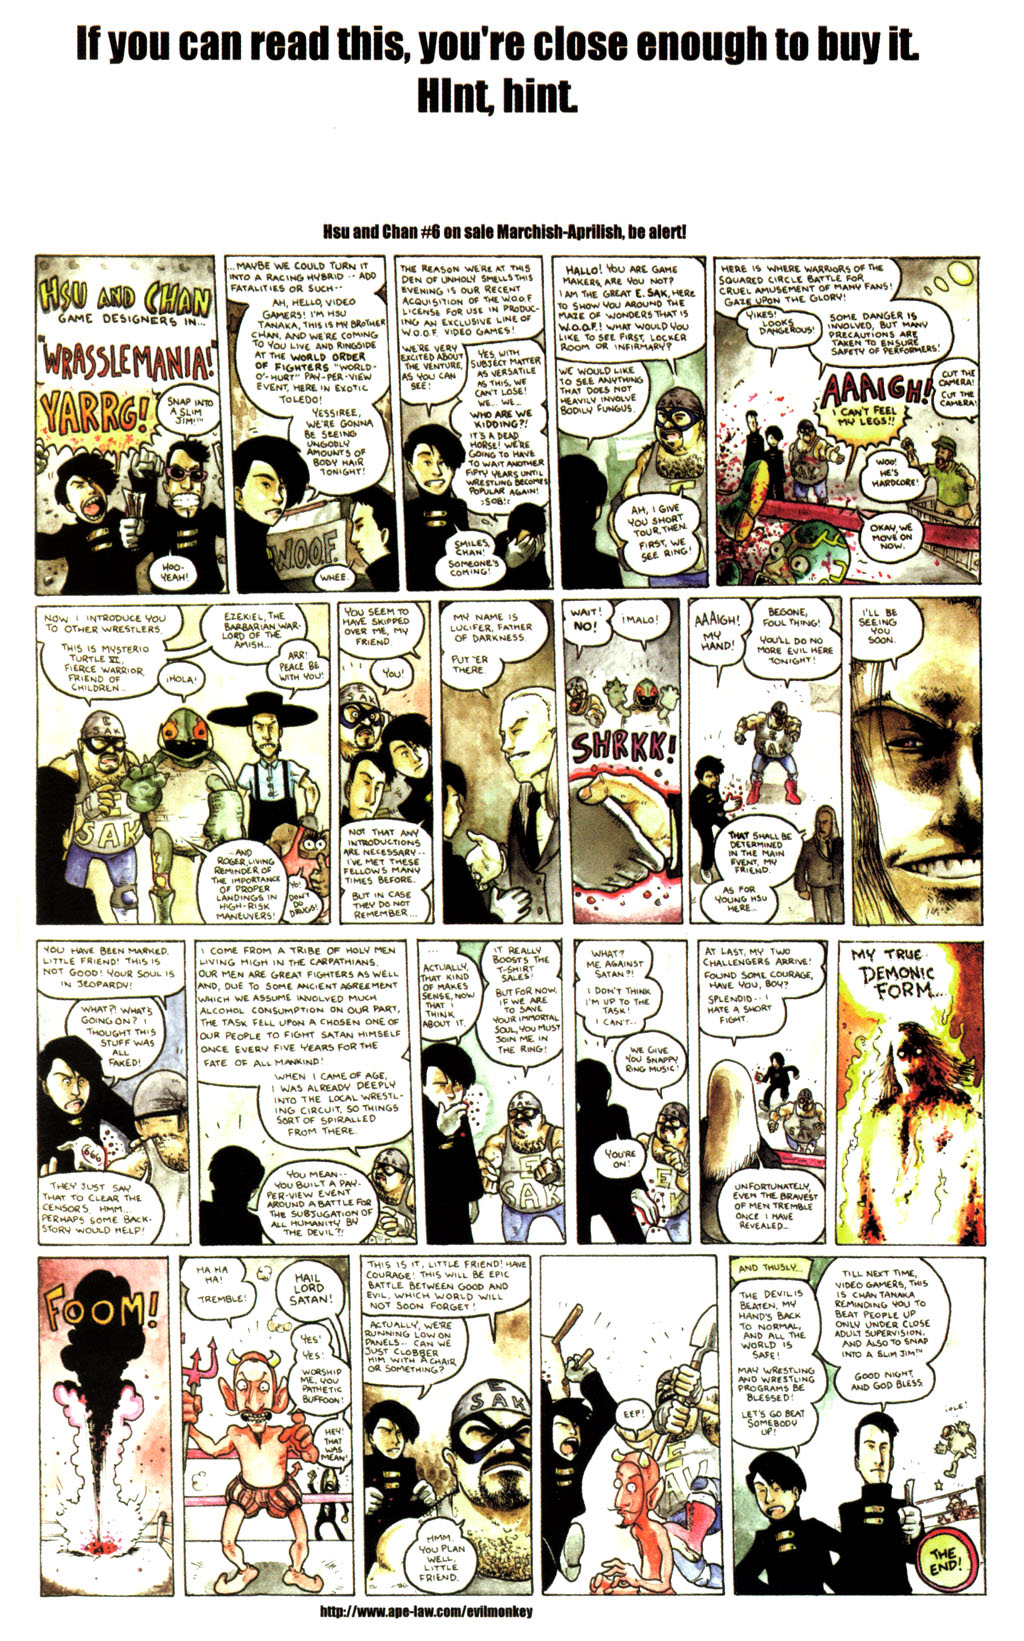 Read online Hsu and Chan comic -  Issue #5 - 28